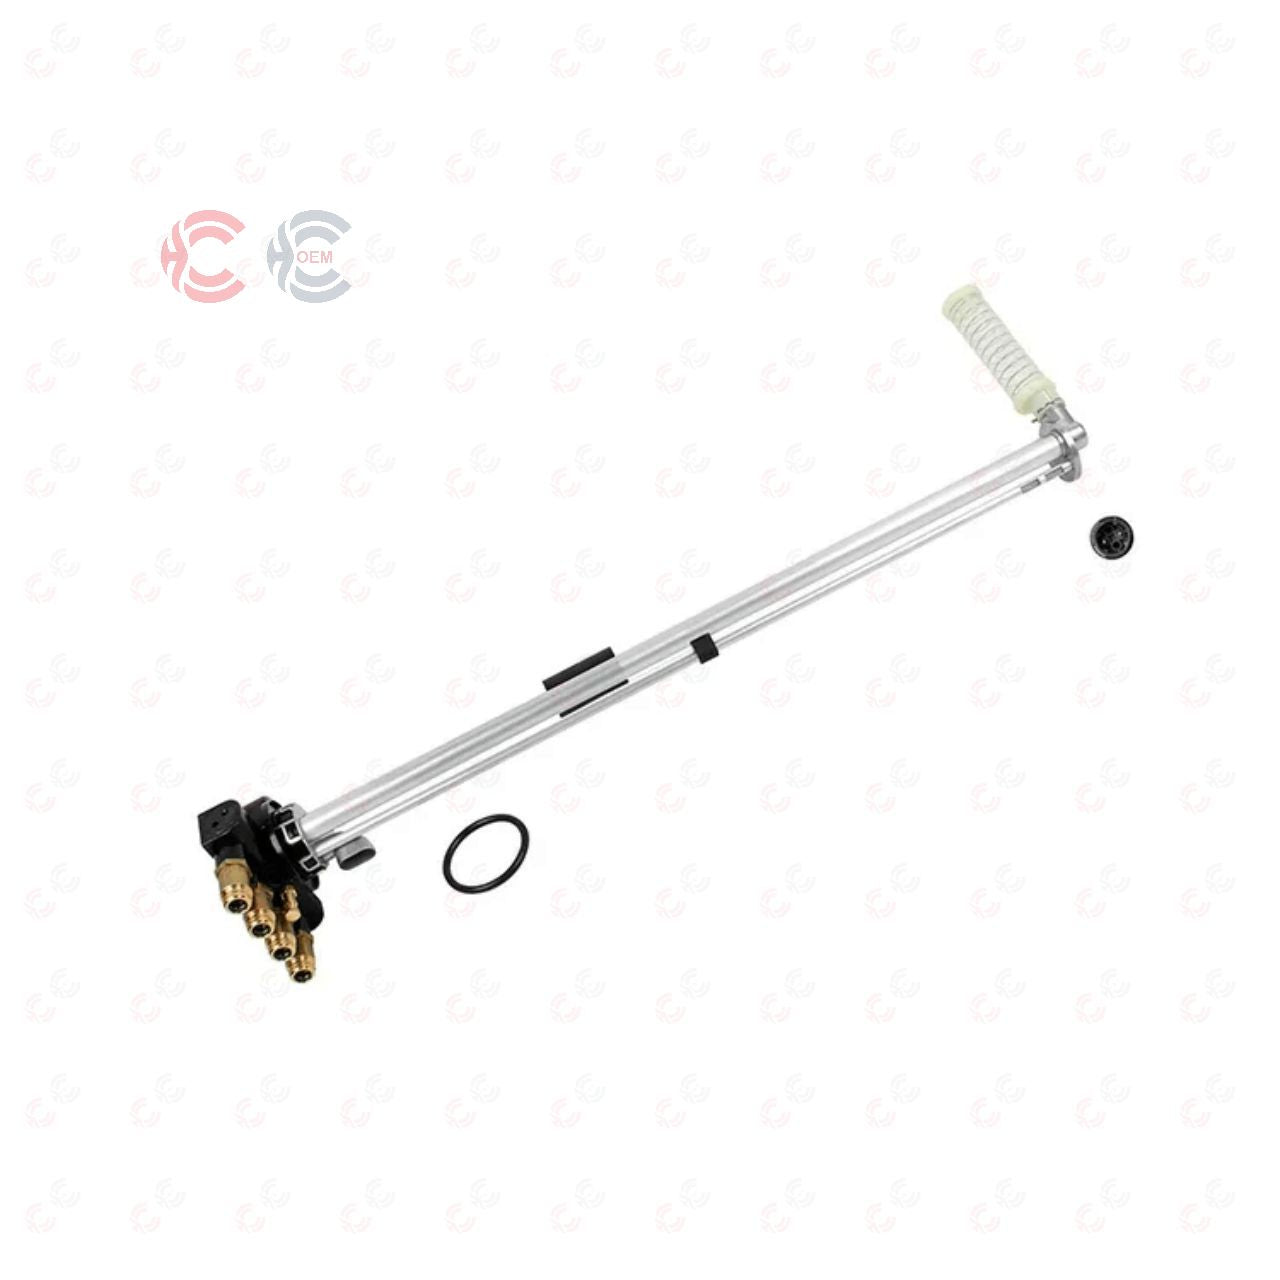 OEM: 1846136Material: ABS metalColor: Black GoldenOrigin: Made in ChinaWeight: 1000gPacking List: 1* Fuel Level Sensor More ServiceWe can provide OEM Manufacturing serviceWe can Be your one-step solution for Auto PartsWe can provide technical scheme for you Feel Free to Contact Us, we will get back to you as soon as possible.